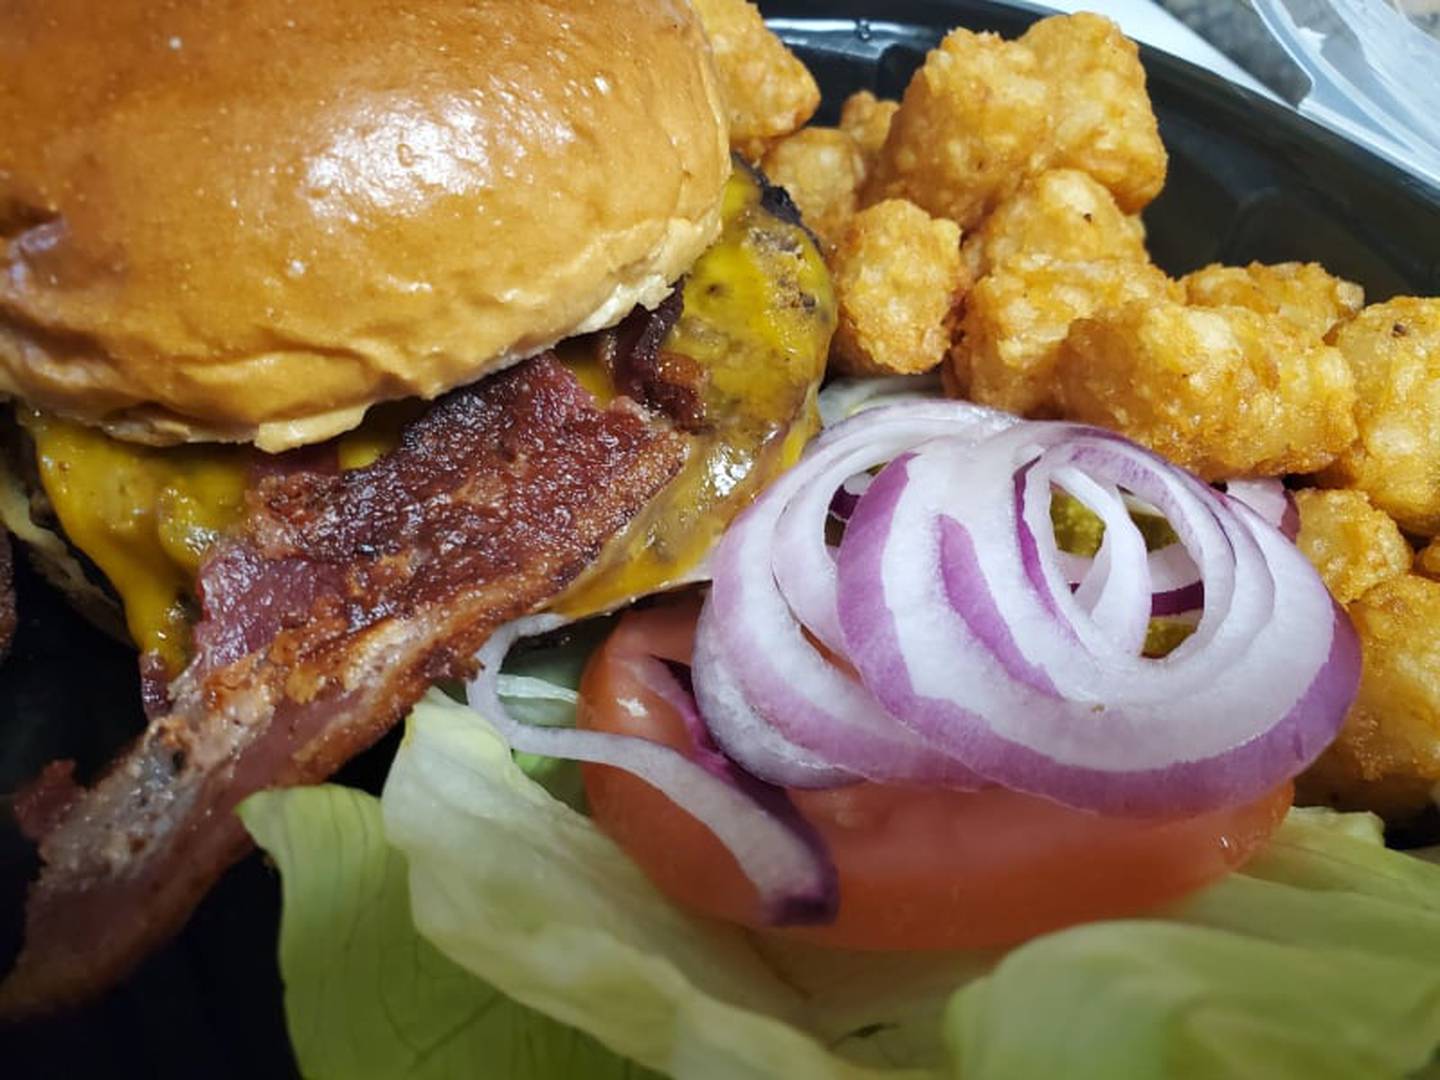 Jameson's Pub in Joliet has a bacon cheddar burger for $19 and a side of tater tots for $2. This burger arrived with a nice “char” on the outside and cooked medium as ordered.